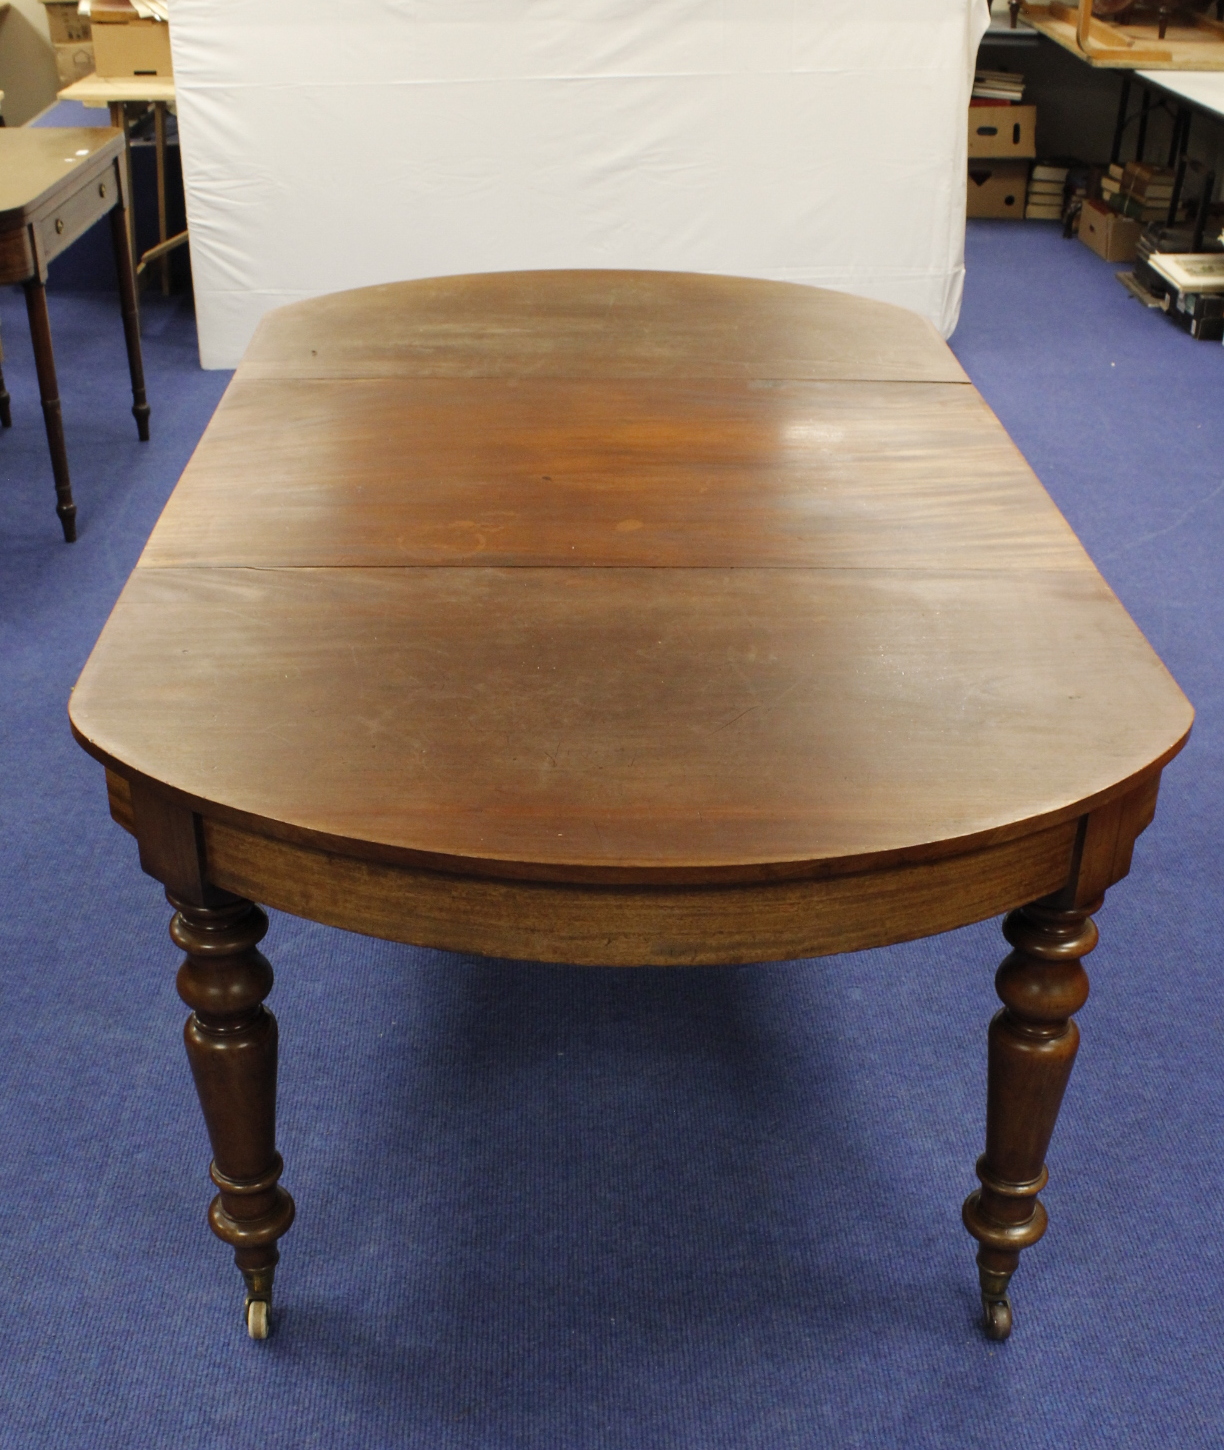 19th century mahogany dining table with curved D ends